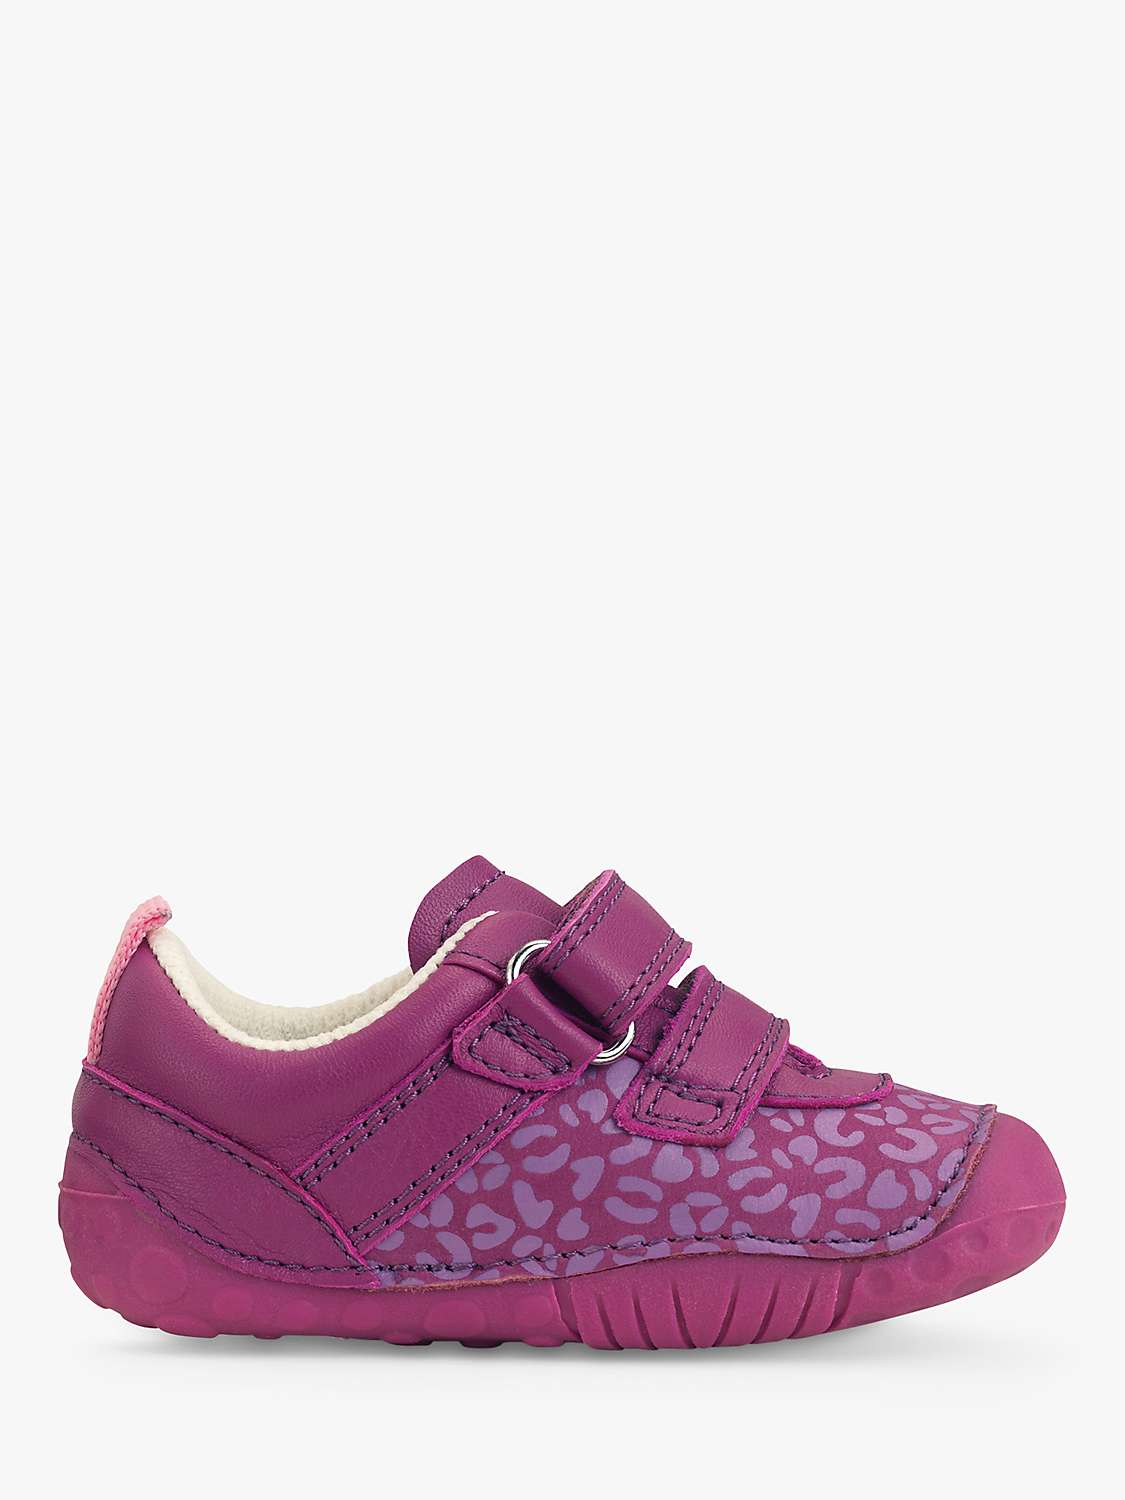 Buy Start-Rite Baby Little Smile Leather Rip Tape Pre Walker Shoes, Berry Online at johnlewis.com